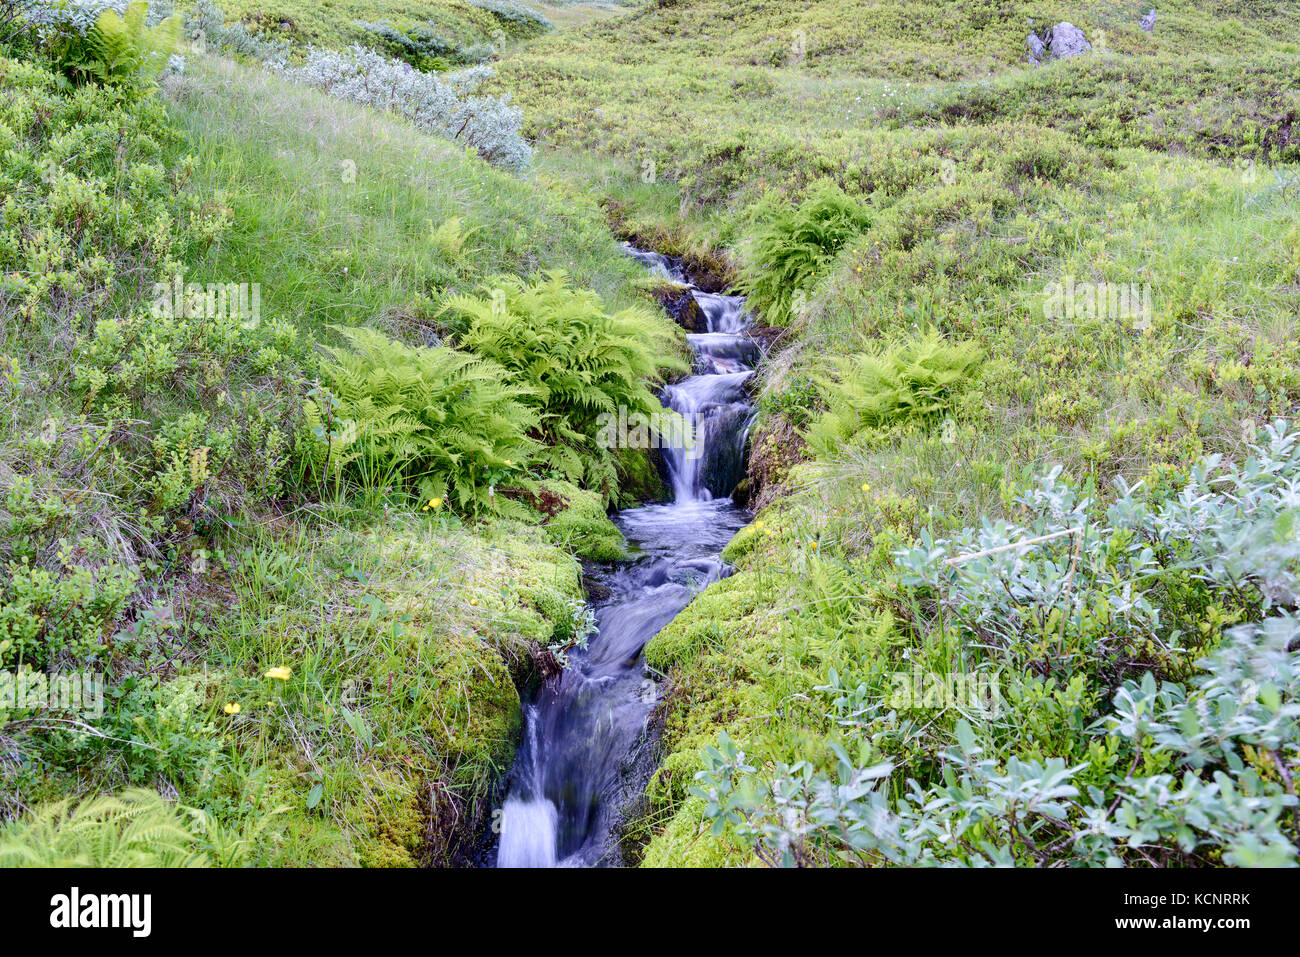 Picture is taken on a hike up Kjølen (mountain). A small river stream running through a completely green landscape. Kvaløya, Tromsø, Norway. Stock Photo